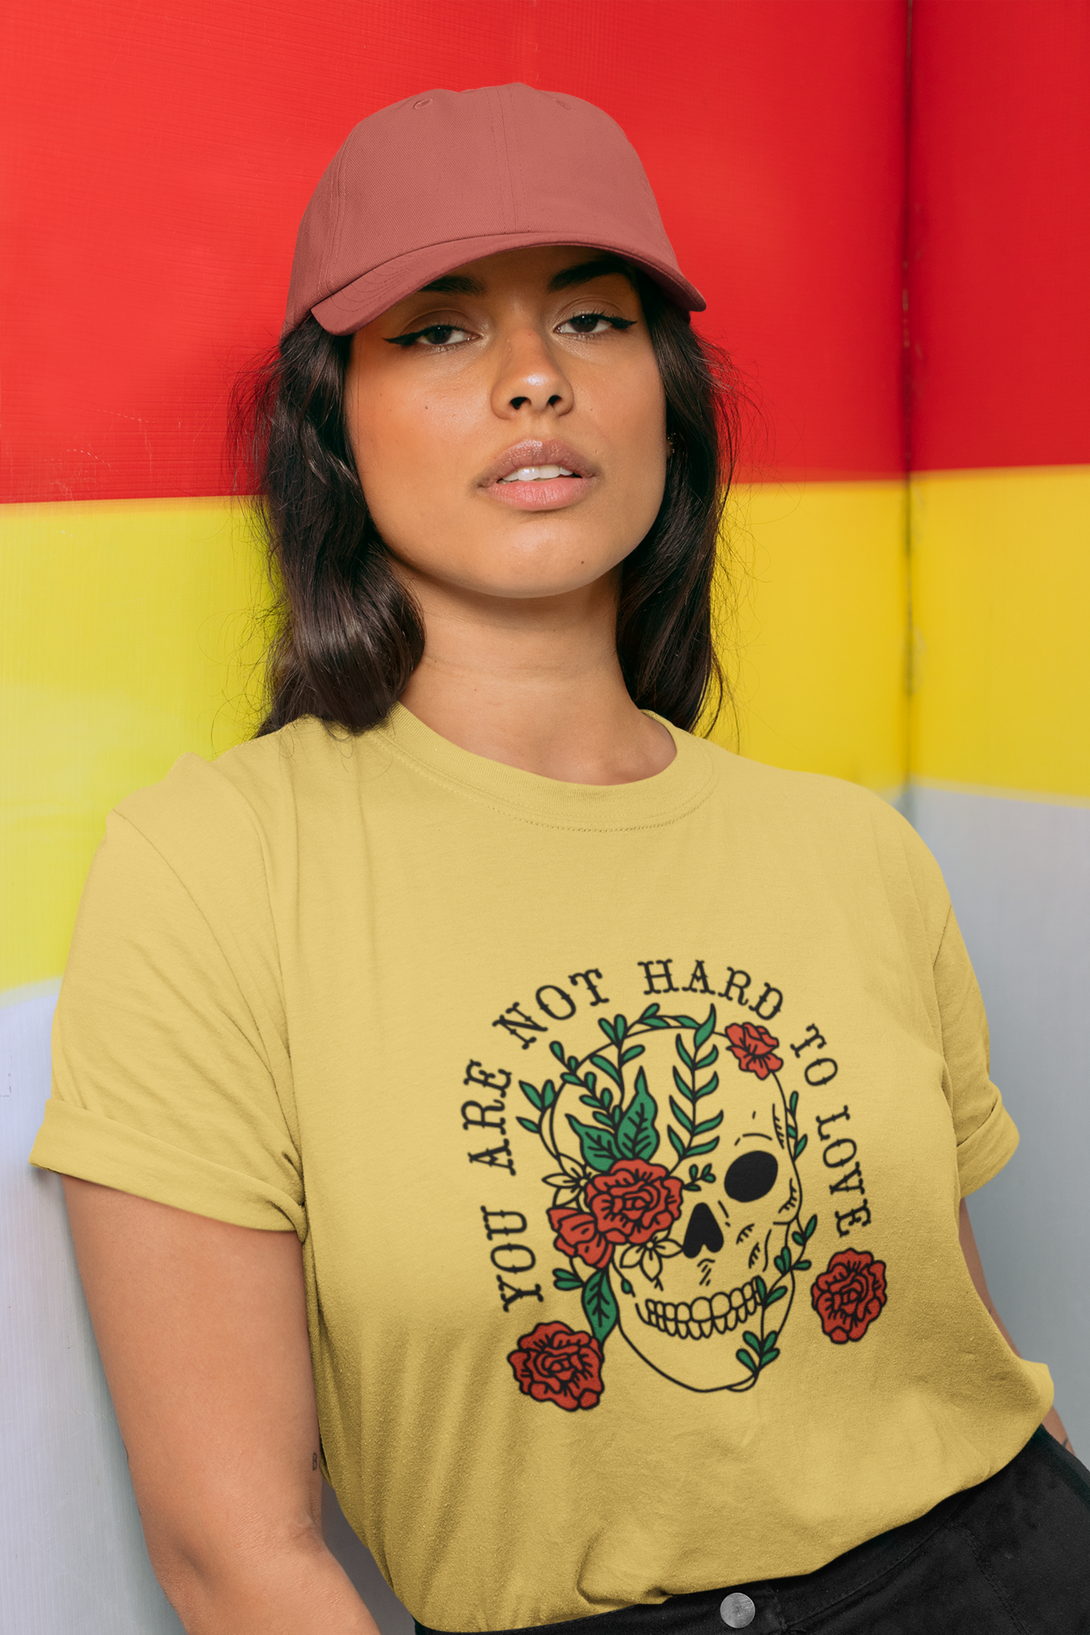 You Are Not Hard To Love Printed T-Shirt For Women - WowWaves - 6